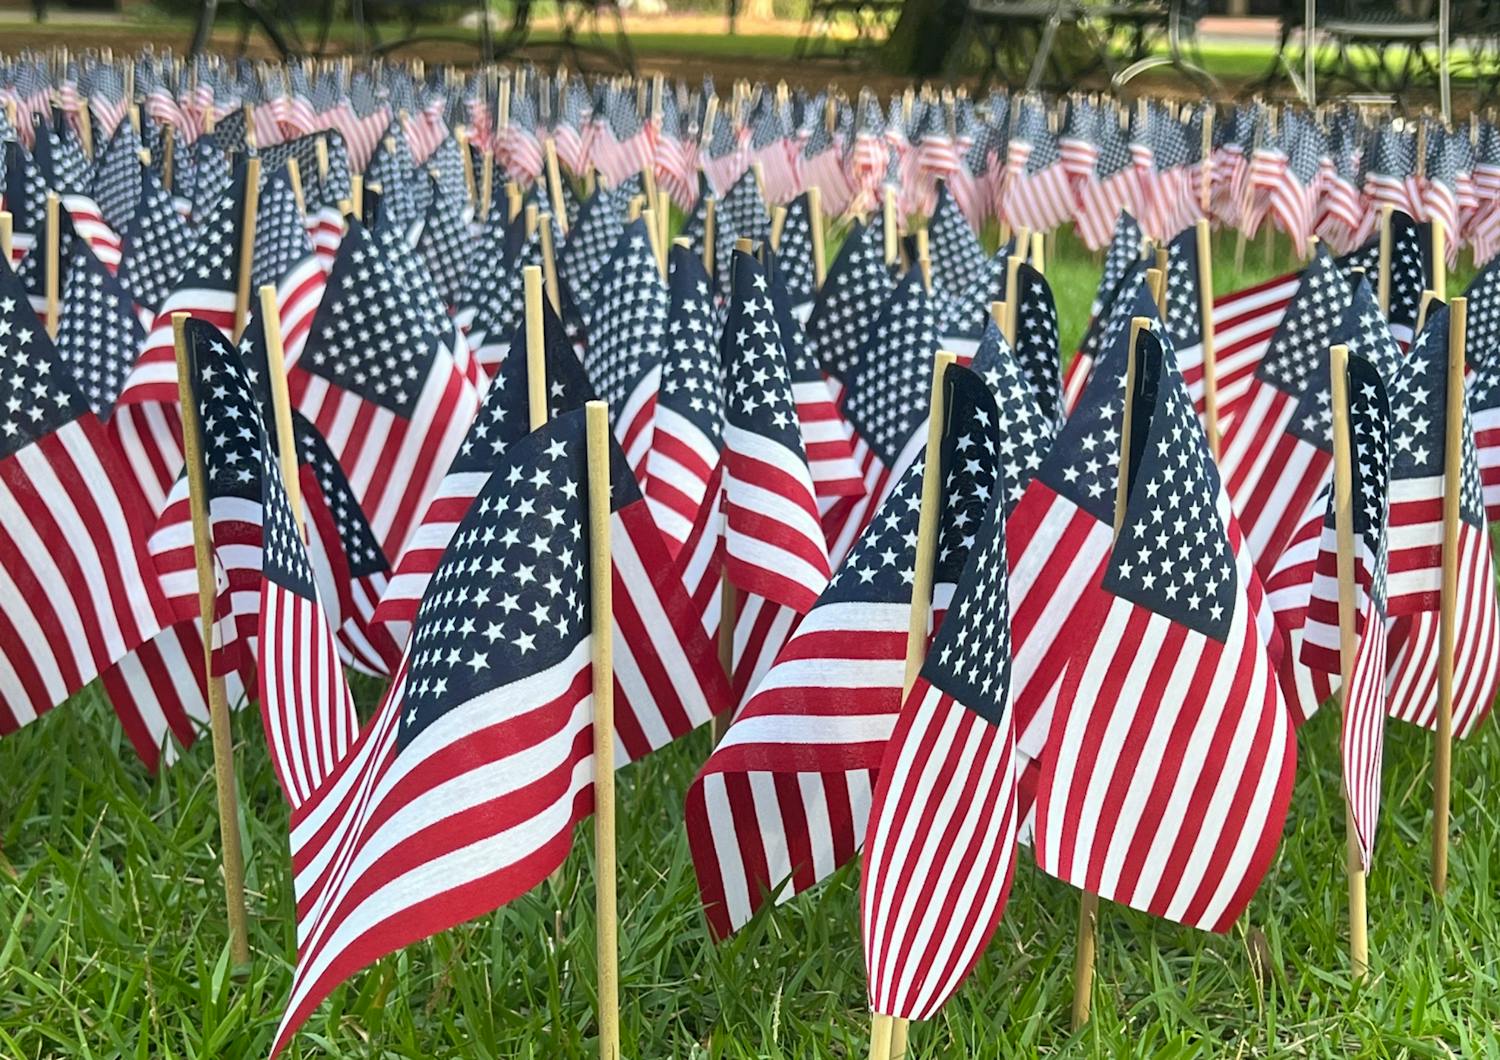 Flags sit across the grass on the 21st anniversary of 9/11 on Sept. 11, 2022 at the Columbia Metropolitan Convention Center. The 9/11 Remembrance Foundation of South Carolina invited guests and veterans to speak in memoriam of the lives lost in relation to the tragedy.